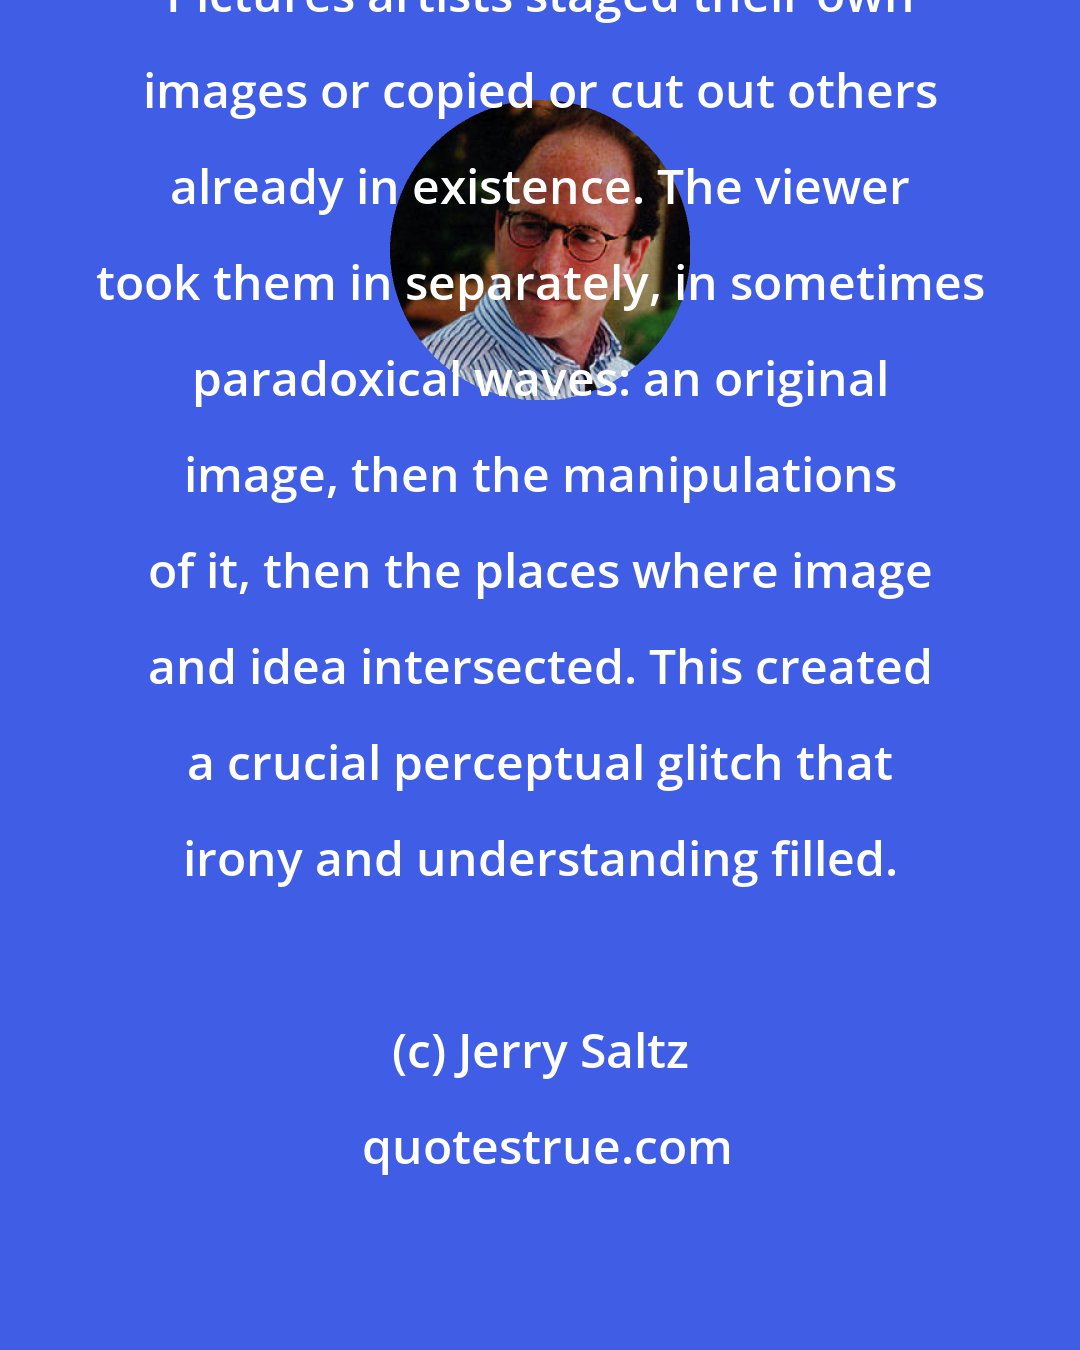 Jerry Saltz: Pictures artists staged their own images or copied or cut out others already in existence. The viewer took them in separately, in sometimes paradoxical waves: an original image, then the manipulations of it, then the places where image and idea intersected. This created a crucial perceptual glitch that irony and understanding filled.